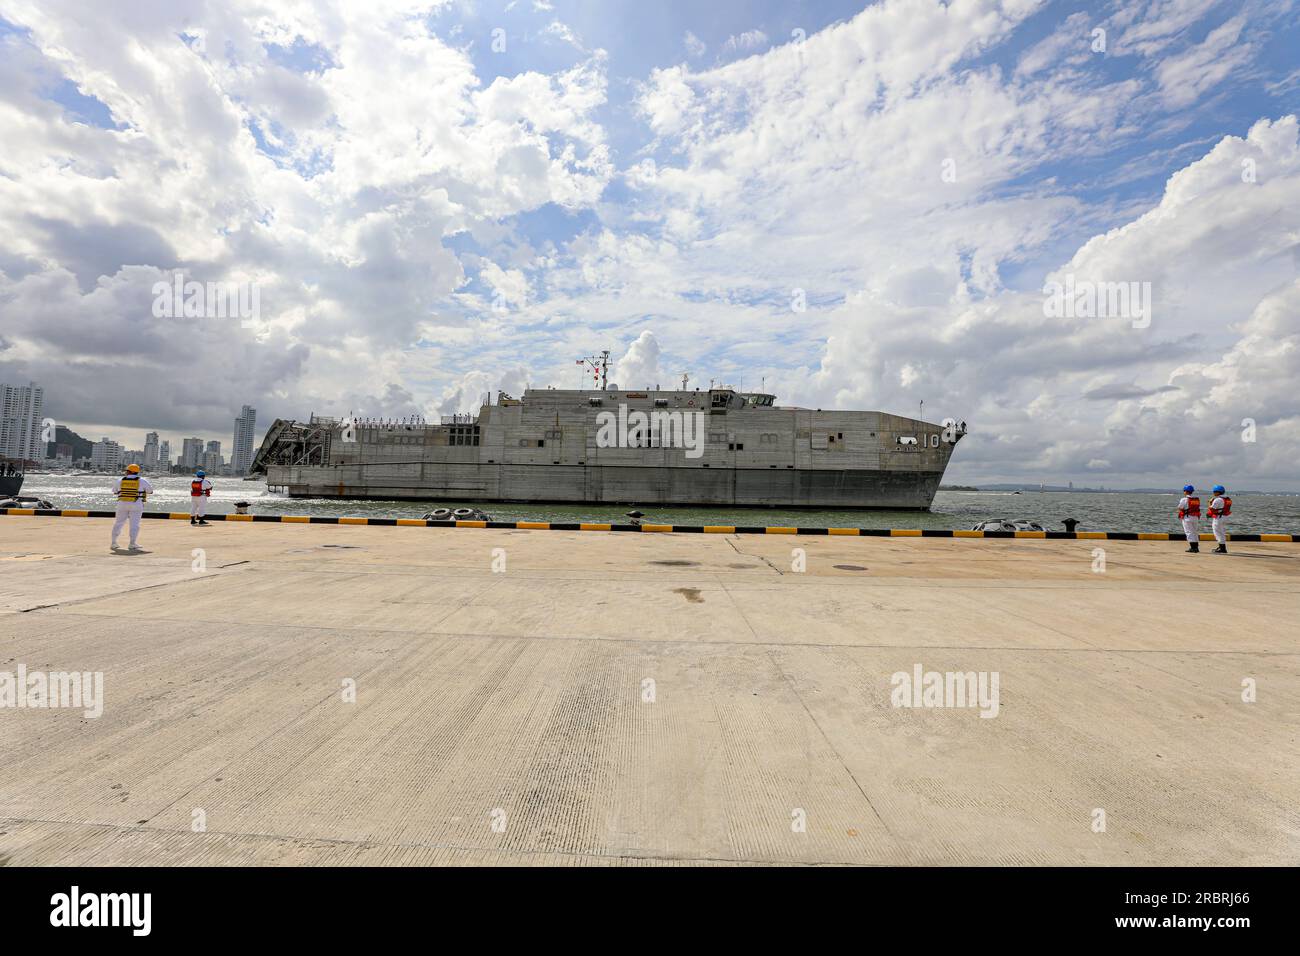 20230701-N-EA586-1013  CARTAGENA, Colombia (July 2, 2023) Expeditionary fast transport USNS Burlington (T-EFP 10) arrives at Colombian Base Naval Logistica ARC 'Bolivar', Colombia in preparation for UNITAS LXIV, July 2, 2023. Burlington is one of 26 vessels slated to participate in UNITAS LXIV, the world’s longest running maritime exercise, July 11-21. Colombia is hosting UNITAS LXIV this year with nearly 7,000 people from 20 nations. (U.S. Navy photo by Lt.j.g. Nicko West/Released) Stock Photo